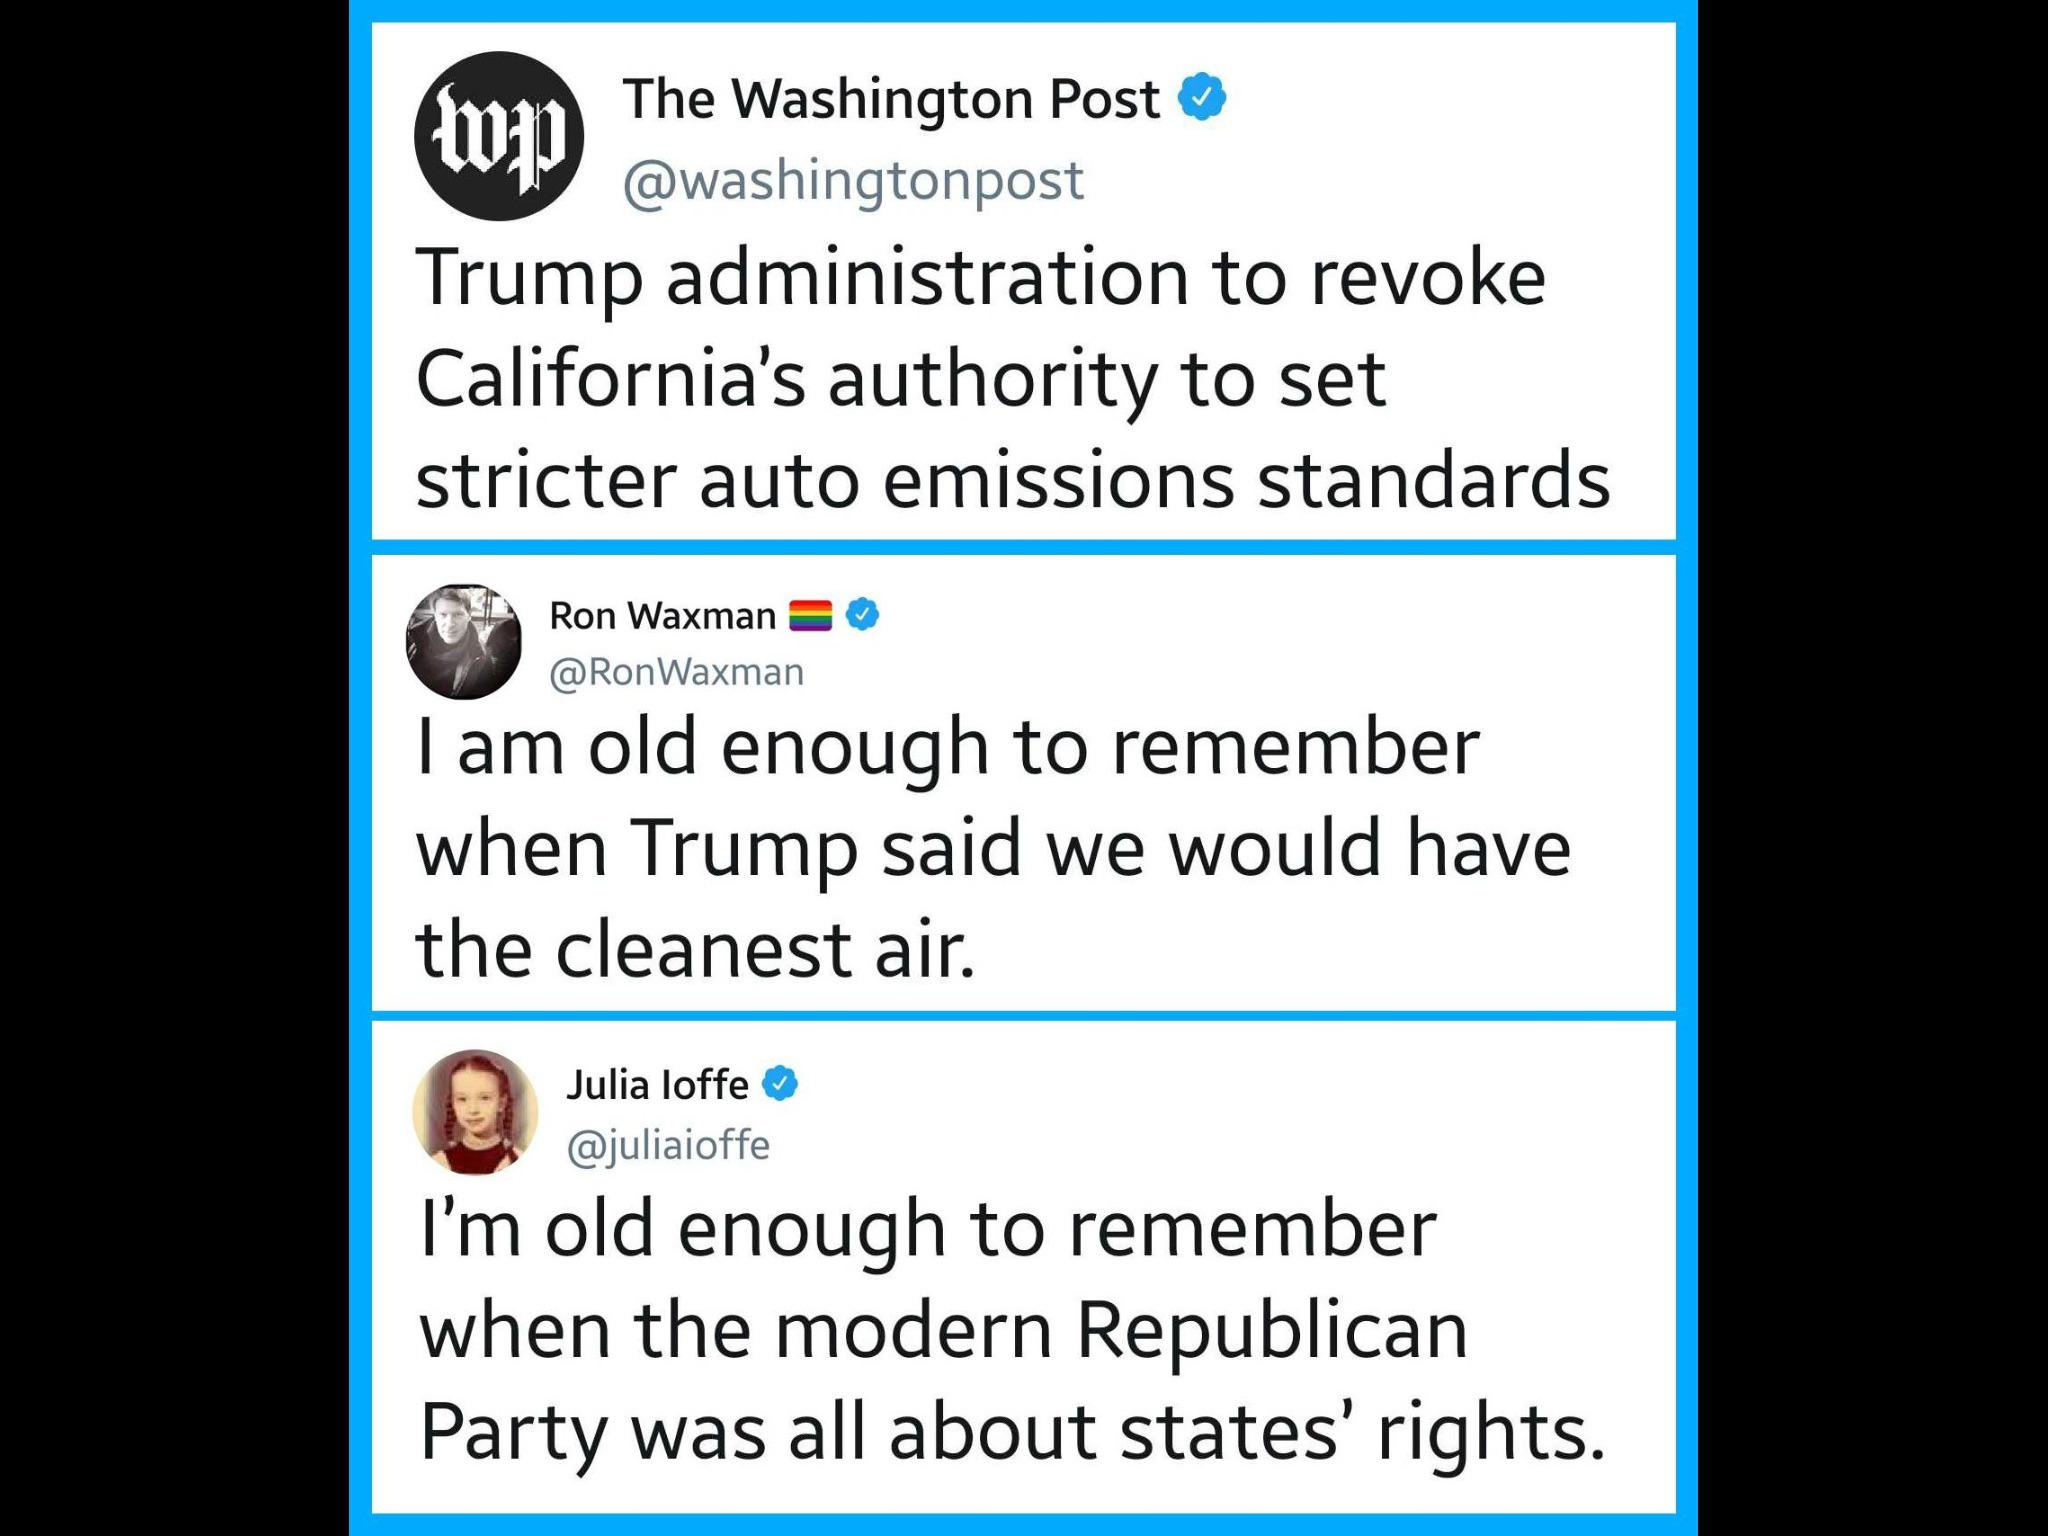 political political-memes political text: The Washington Post @washingtonpost Trump administration to revoke California's authority to set stricter auto emissions standards Ron Waxman @RonWaxman I am old enough to remember when Trump said we would have the cleanest air. Julia loffe @juliaioffe I'm old enough to remember when the modern Republican Party was all about states' rights. 